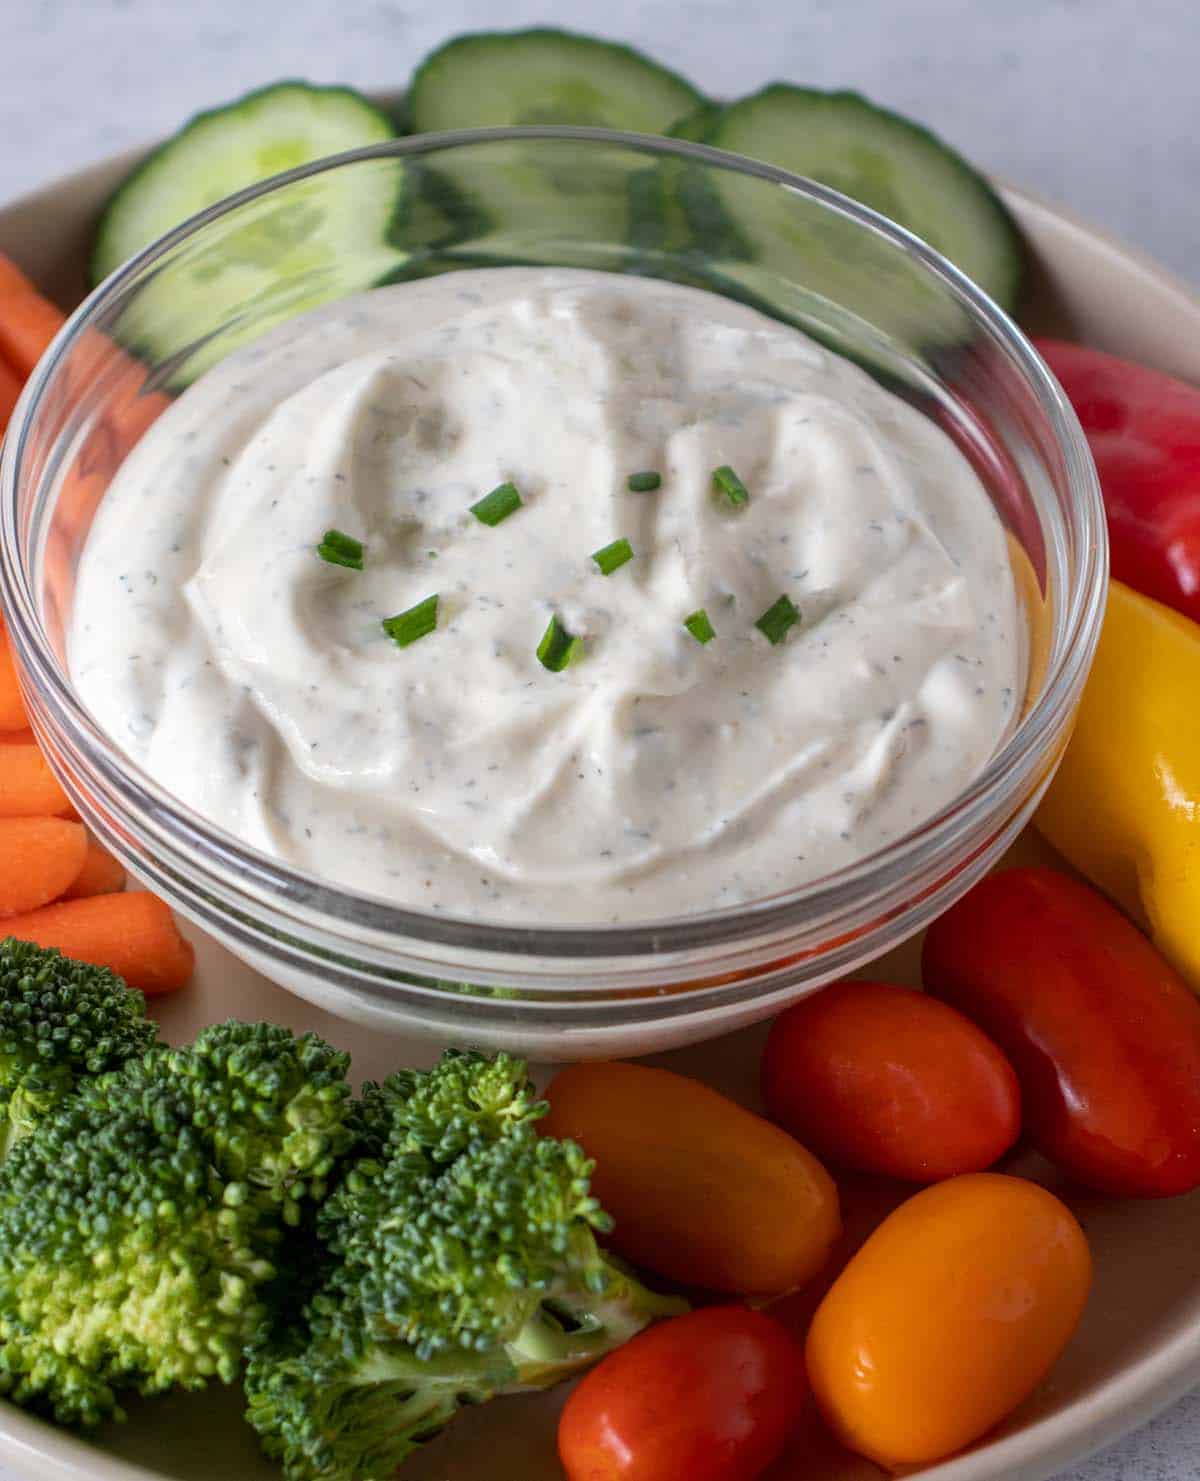 homemade ranch dip in a clear glass bowl garnished with fresh chopped chives. Fresh veggies surrounding the bowl which include tomatoes, broccoli, carrots, cucumbers and bell peppers.